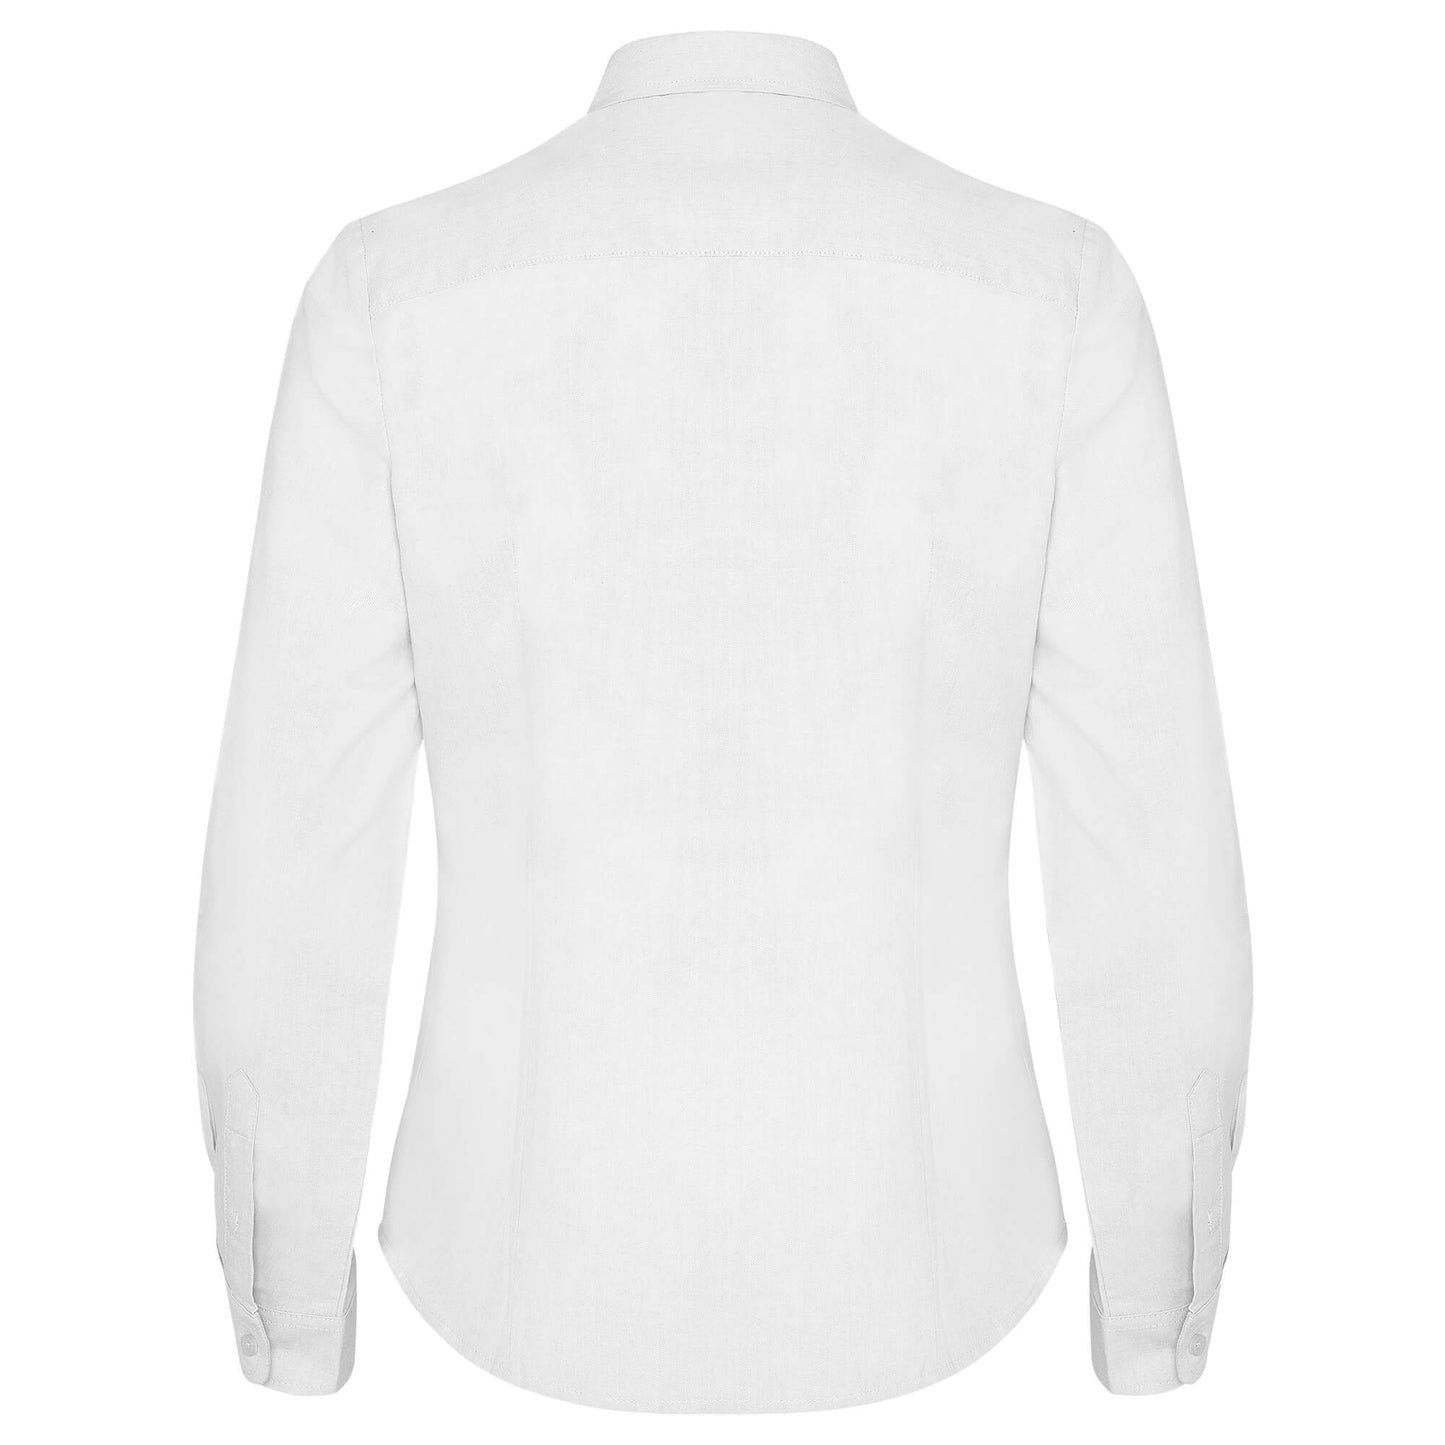 Chemise manches longues OXFORD WOMAN